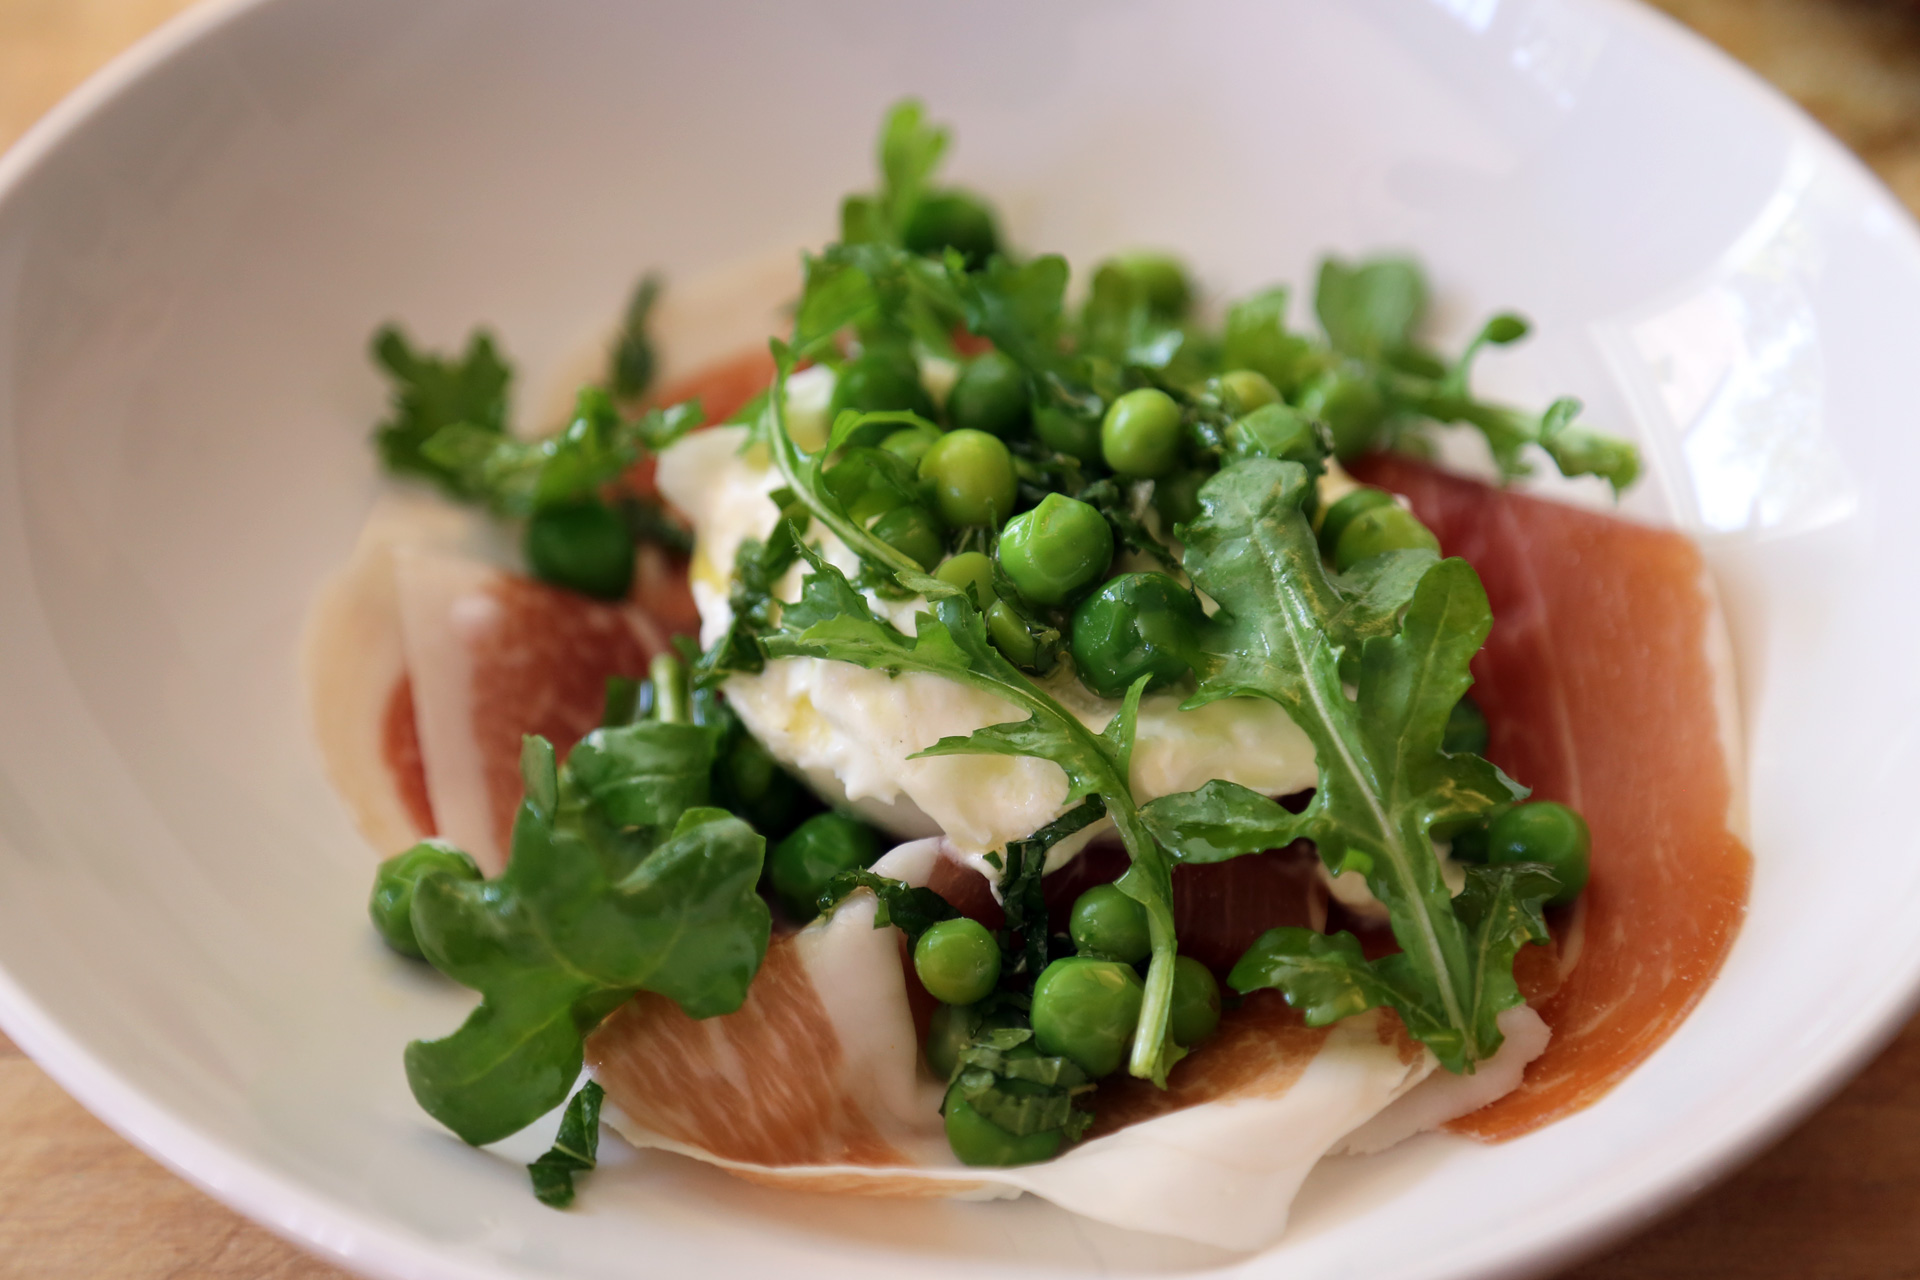 Top with a little arugula and serve.